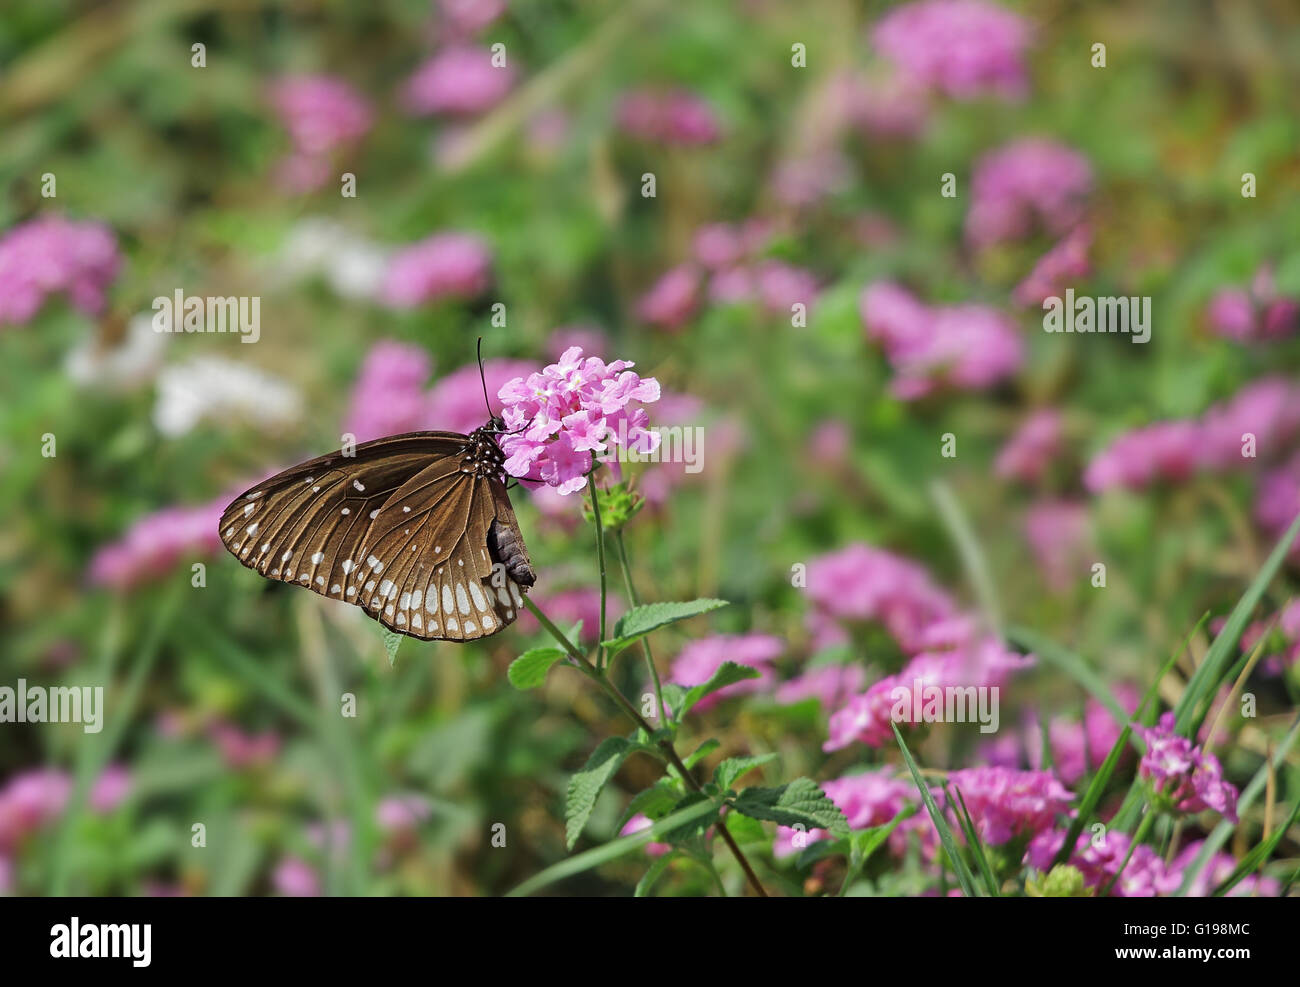 Common crow butterfly, Euploea Core, feeding on pink flowers. Dark brown butterfly with white spots on wing and body. Stock Photo